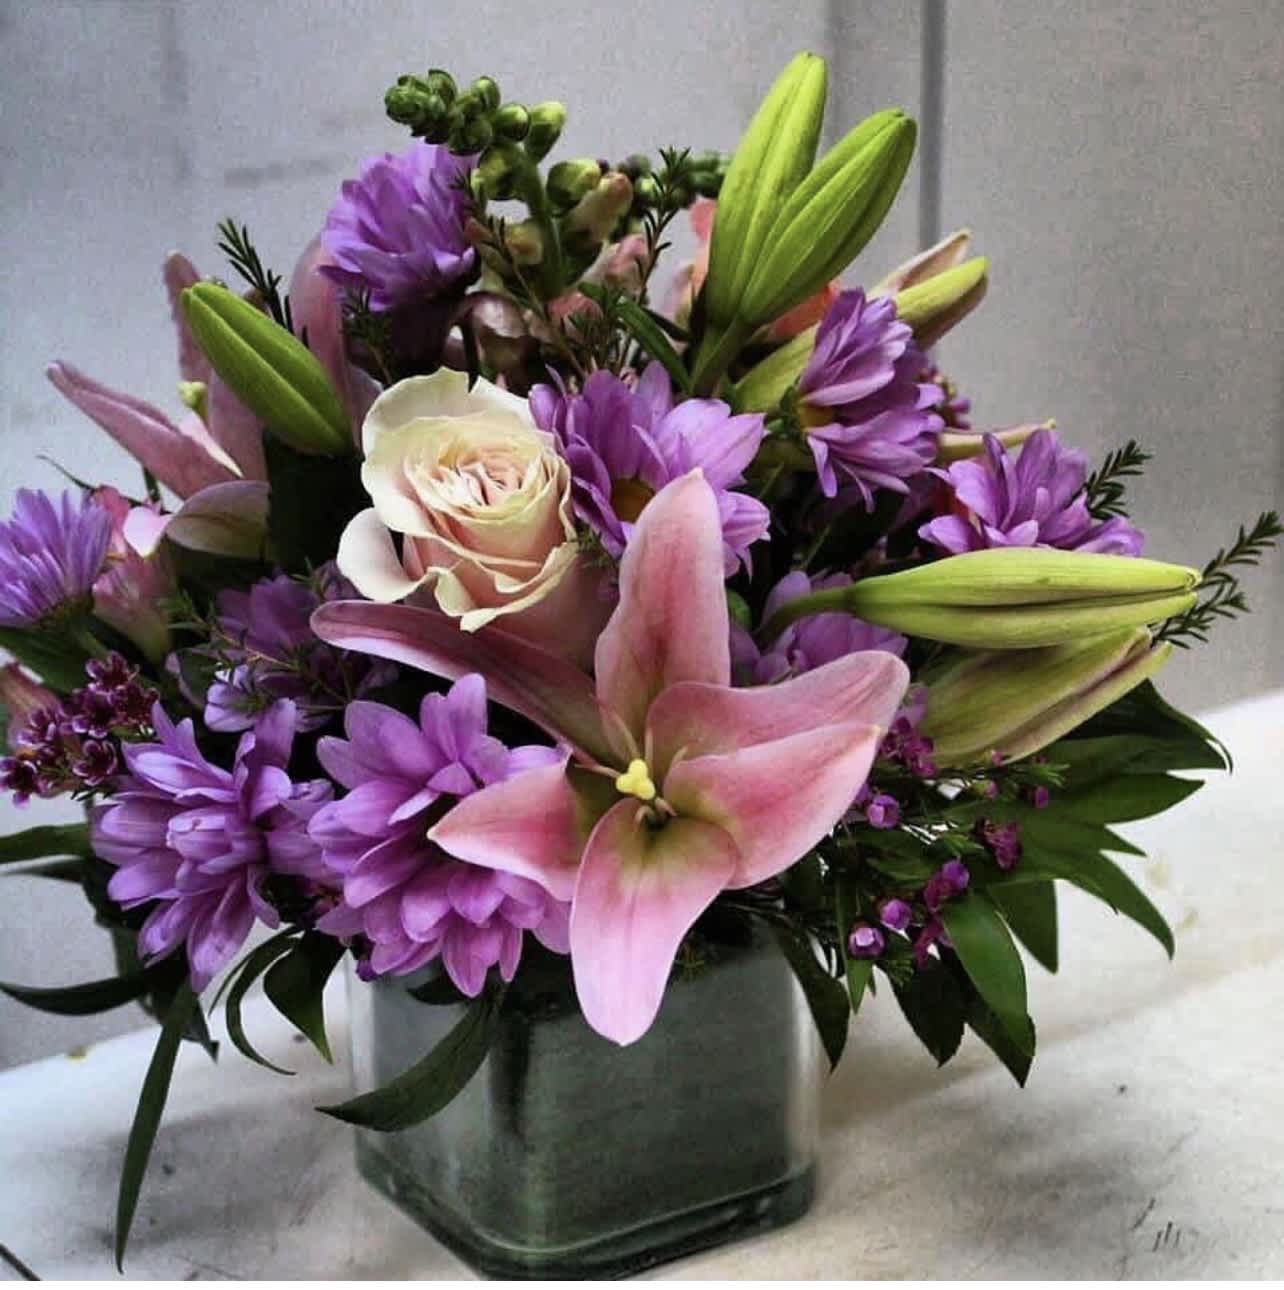 Chic Stems - Soft hues of pink and purple make this a perfect bouquet for any girly girl in your life!